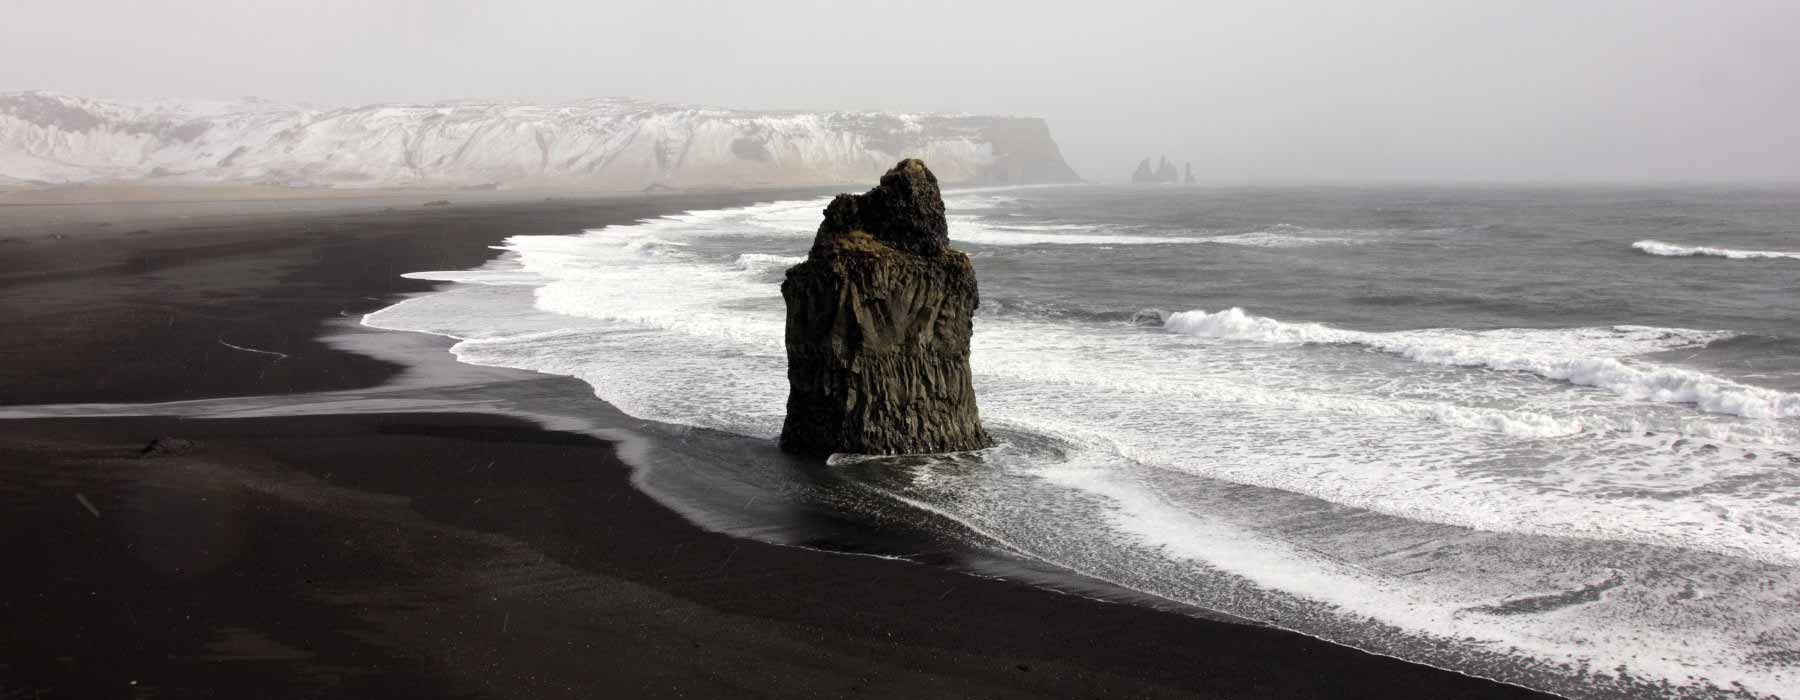 All our Iceland<br class="hidden-md hidden-lg" /> Romantic Escapes